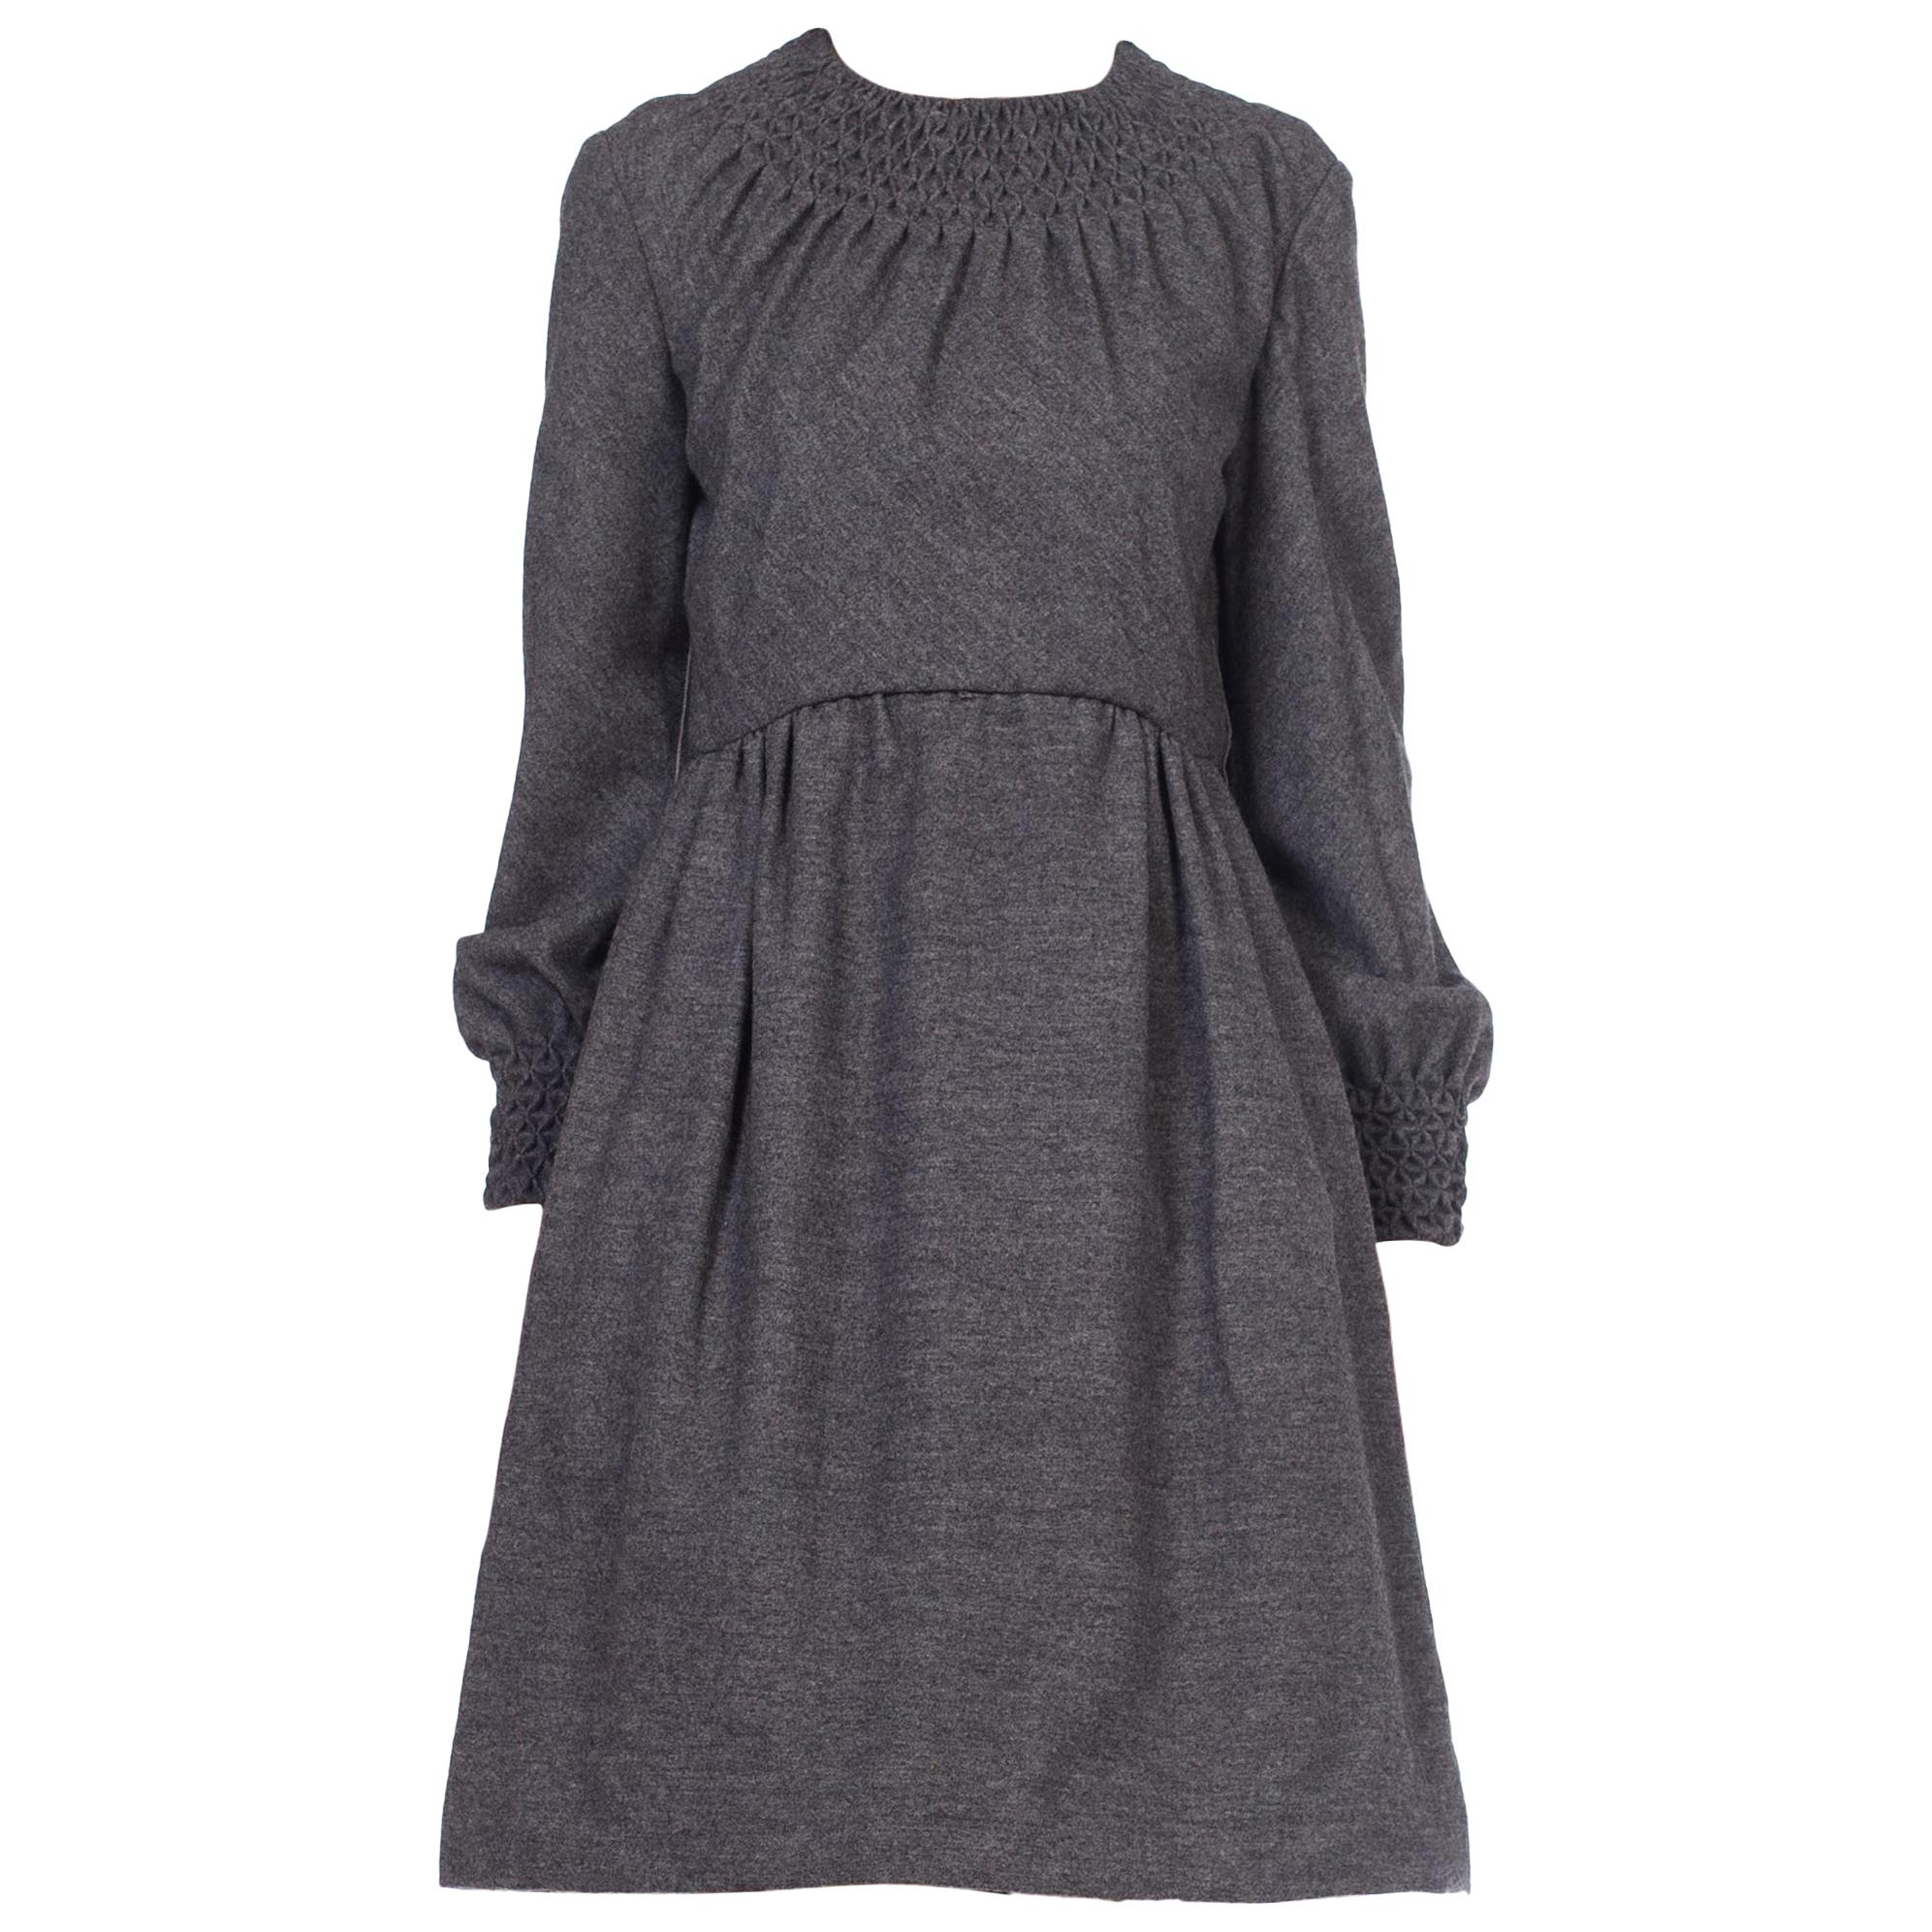 1960S CHESTER WEINBERG Style Grey Wool Dress Lined In Silk With Pockets For Sale